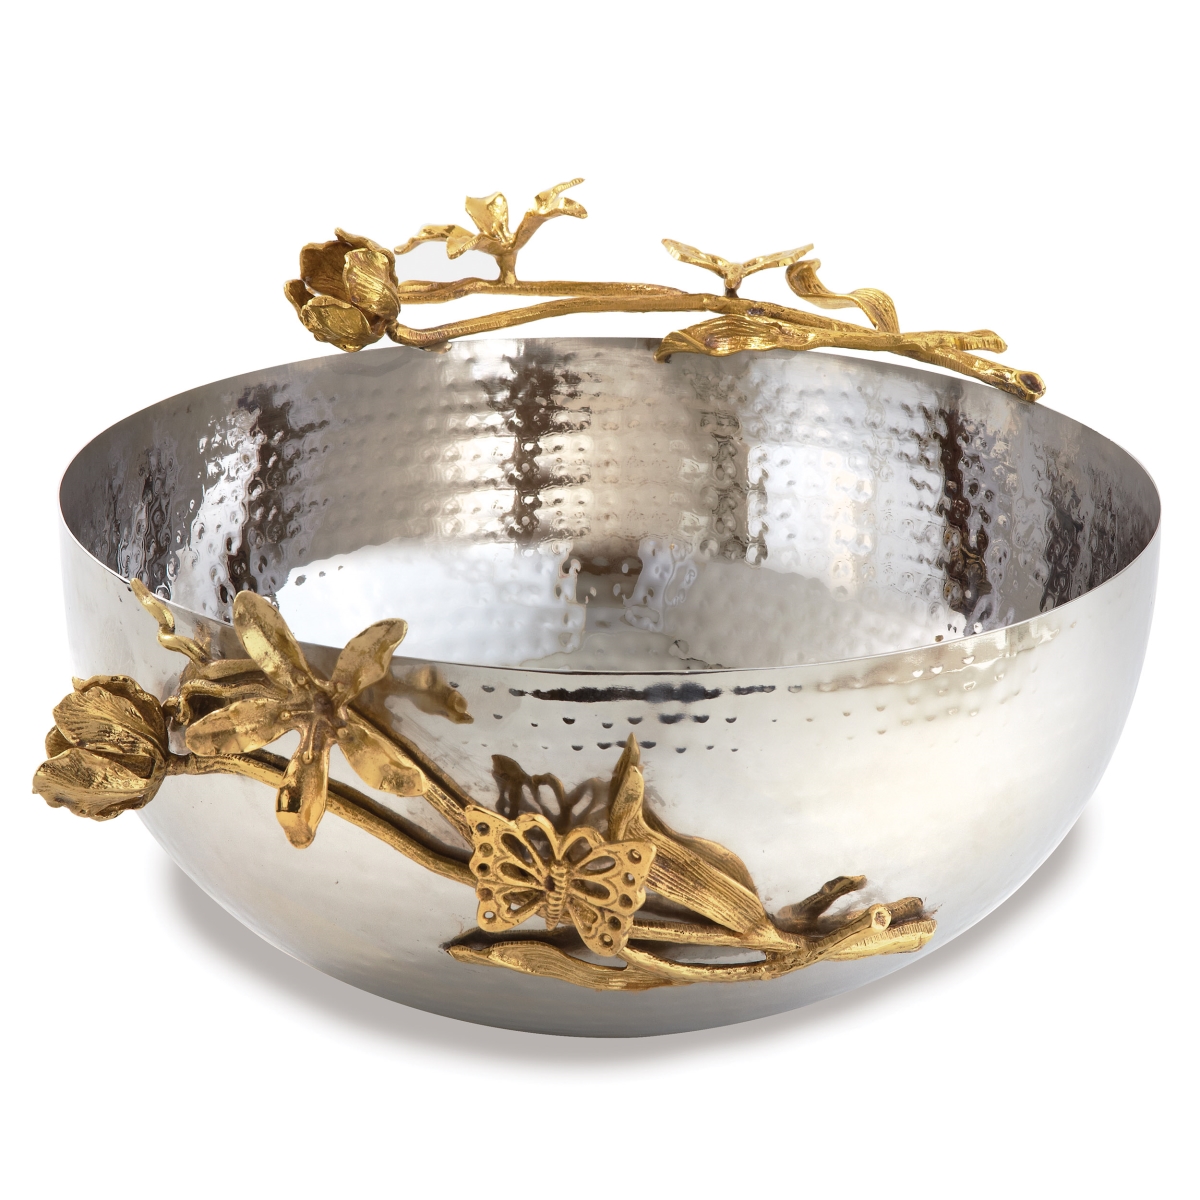 70060 11.5 X 5.25 In. Butterfly Centerpiece Serving Bowl, Silver & Gold